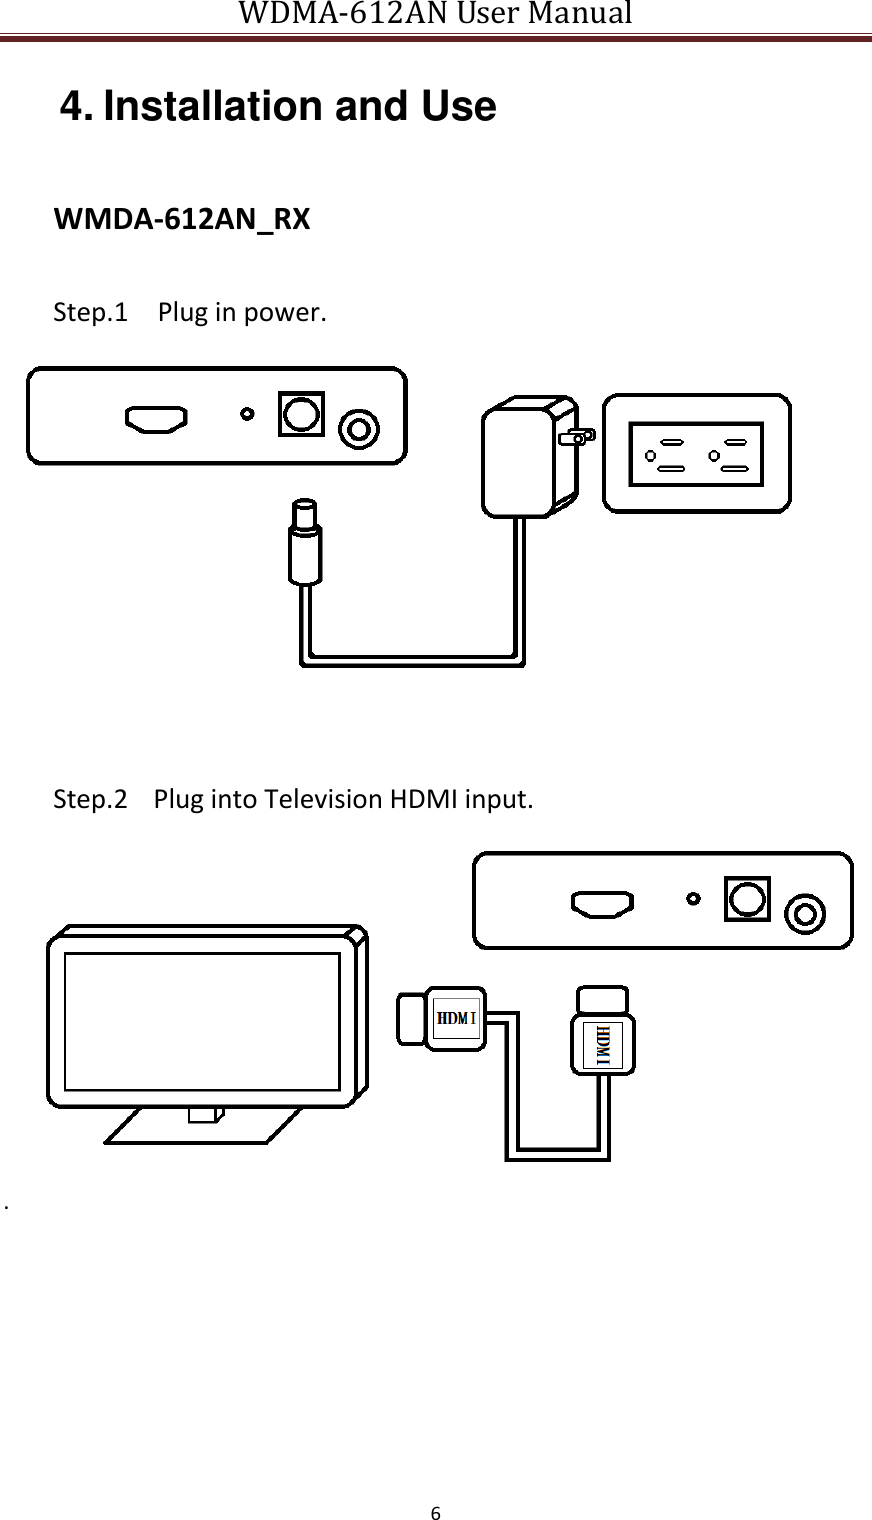 WDMA-612AN User Manual   6  4. Installation and Use    WMDA-612AN_RX    Step.1    Plug in power.     Step.2  Plug into Television HDMI input. .        